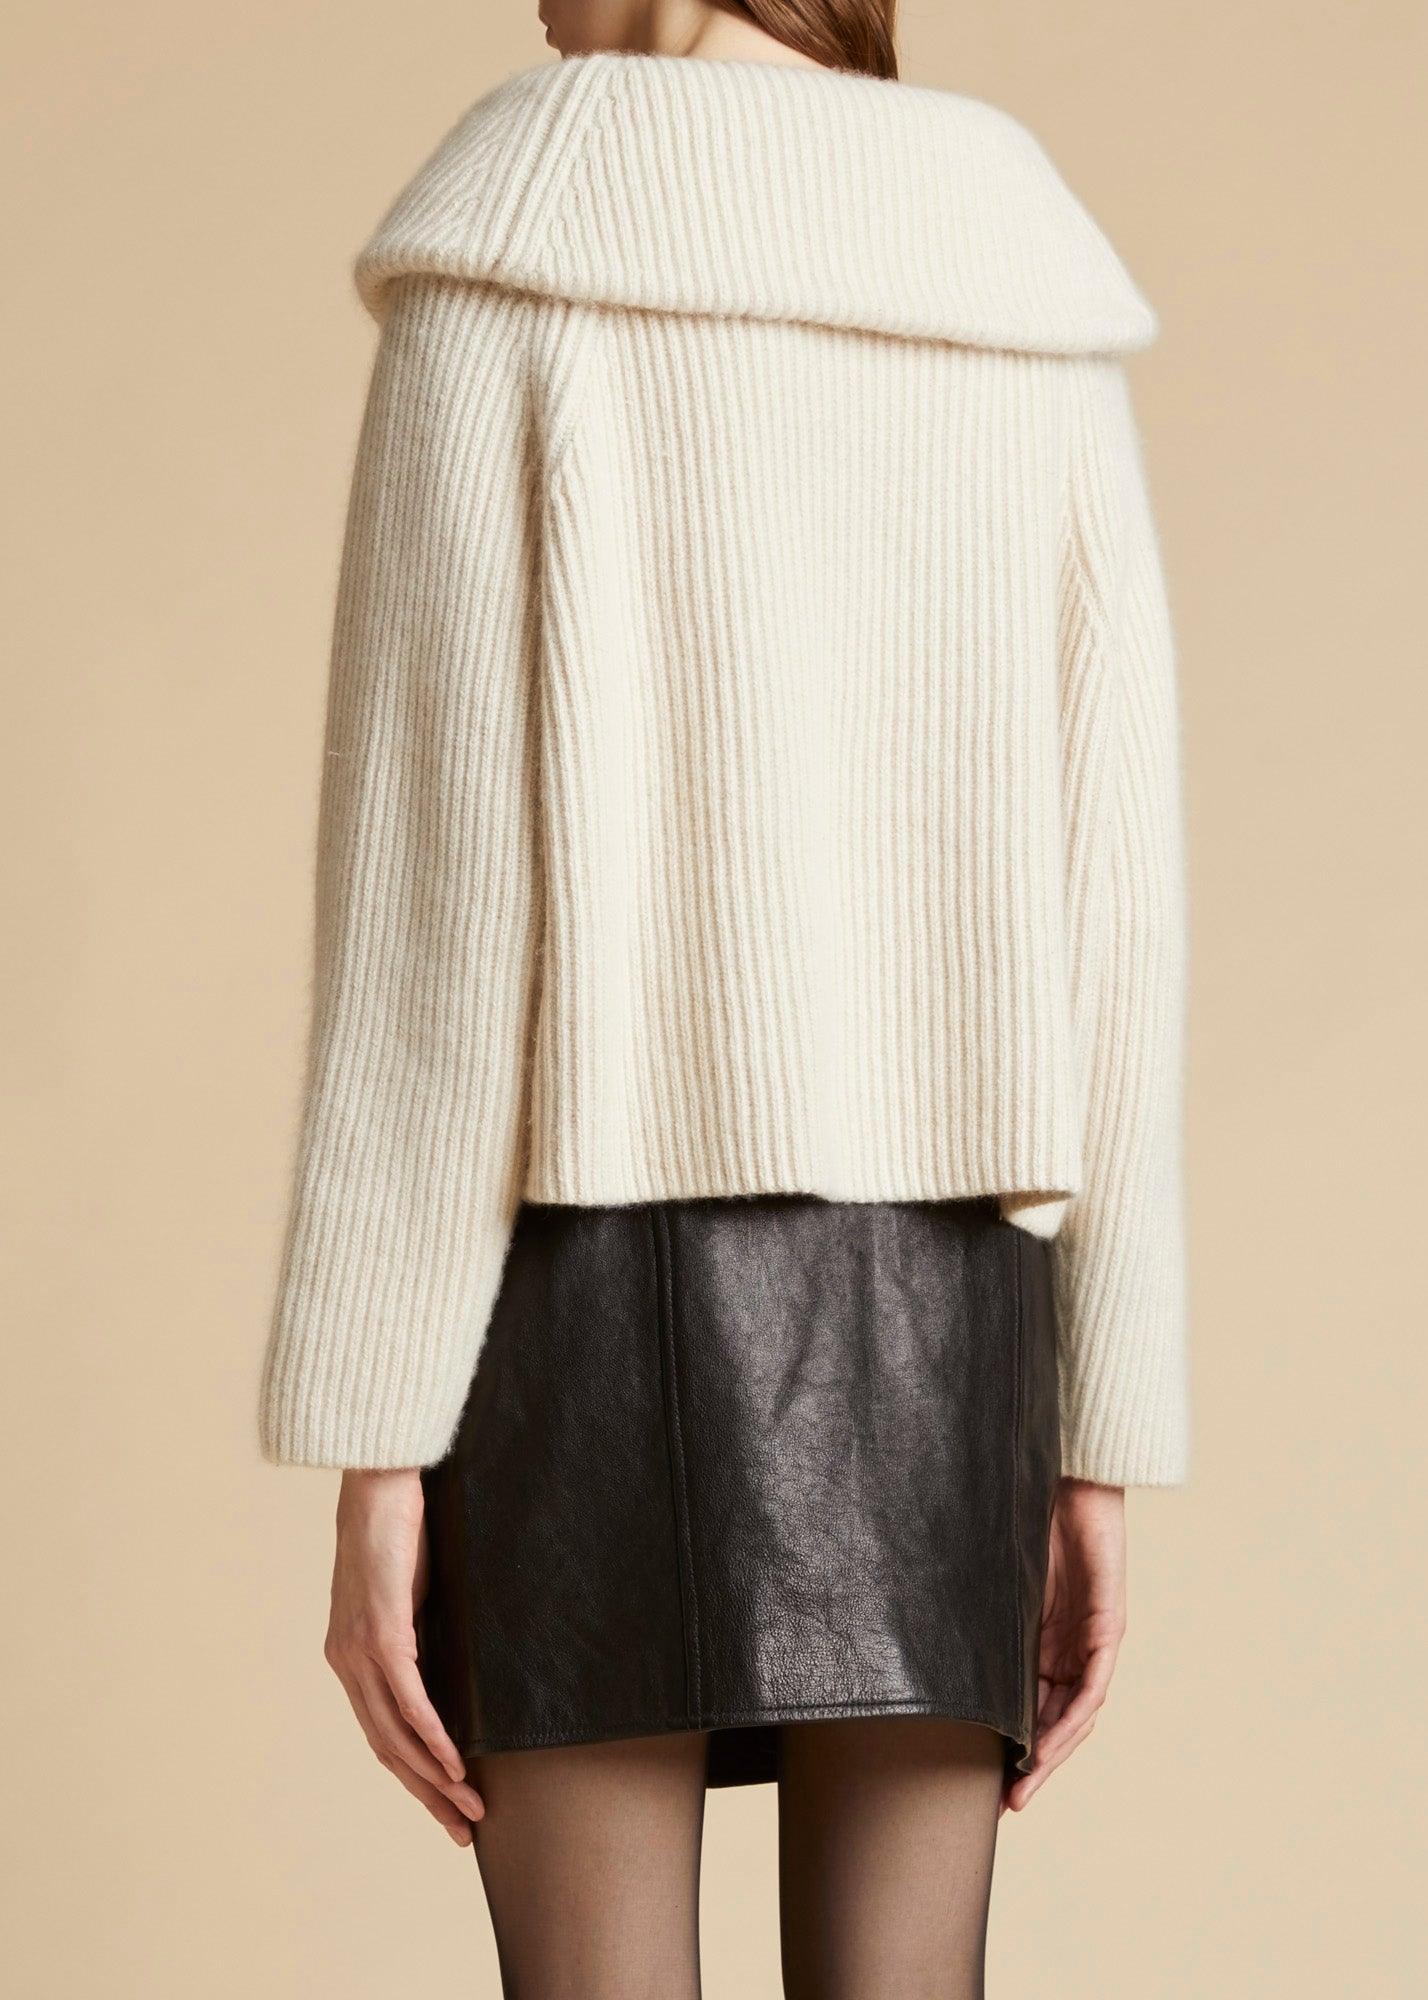 The Raisa Sweater in Magnolia - The Iconic Issue